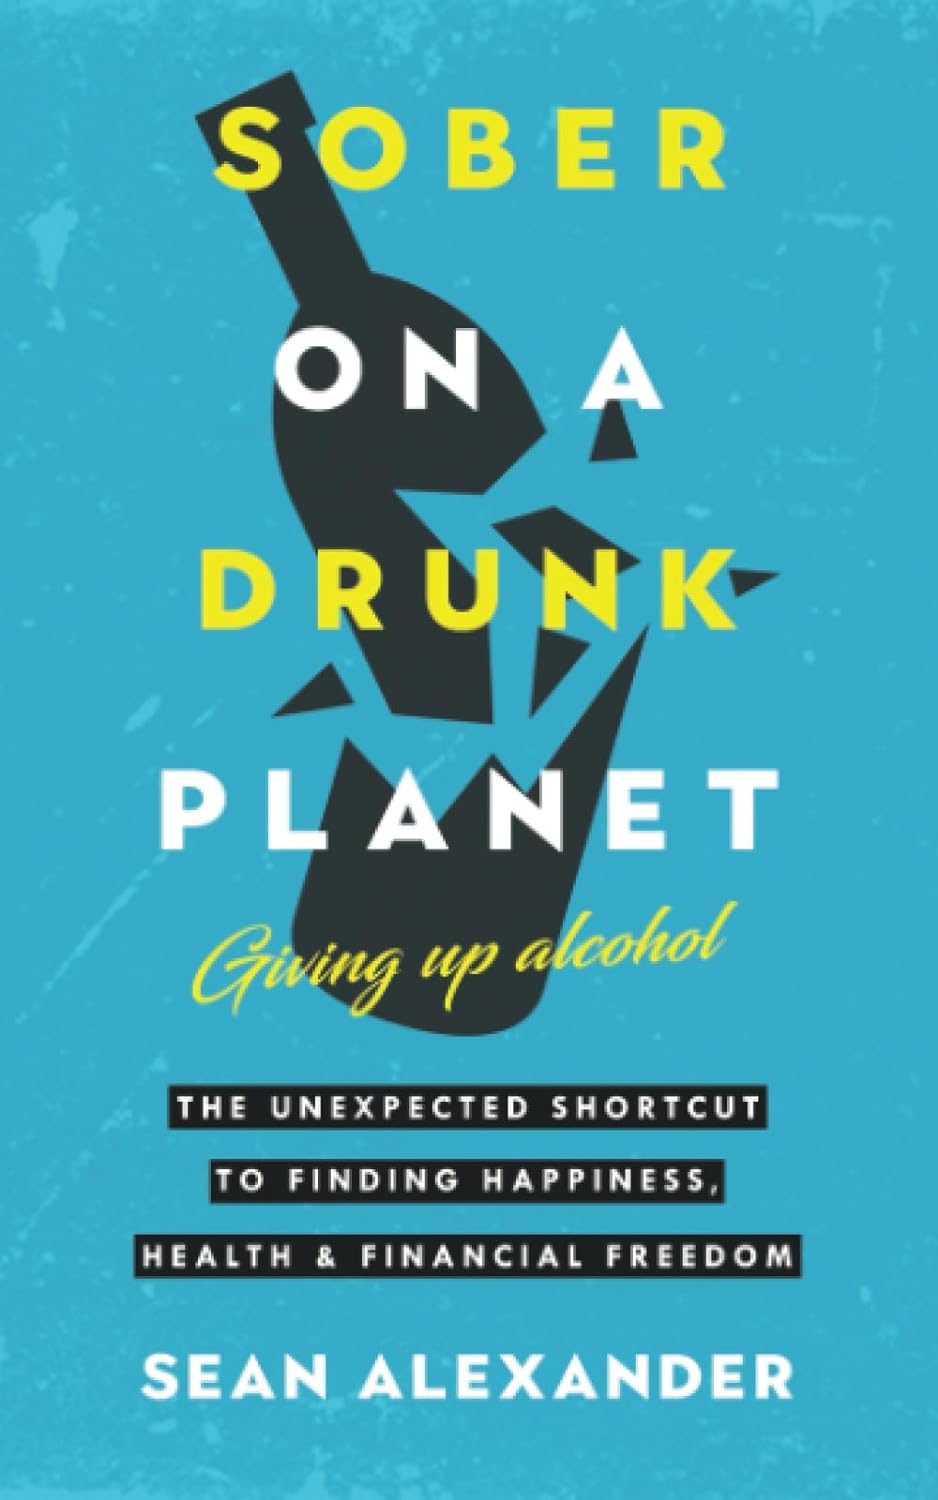 <p>A more recent addition to the “Quit Lit” canon, <a href="https://www.amazon.com/Sober-Drunk-Planet-Unexpected-Happiness/dp/B09X4SFZNW/?tag=skmsn-20"><em>Sober on a Drunk Planet</em></a> is full of eye-opening facts about how drinking affects us physiologically, psychologically, socially, and even financially. Author Sean Alexander is a certified counselor, fitness coach, and financial advisor. He builds a strong case for sobriety by focusing on what we <em>gain</em> when we quit drinking. It’s a worthwhile read for anyone who’s considering a dry lifestyle, even if they don’t have an alcohol use disorder.</p> <a href="https://www.amazon.com/dp/B09X4SFZNW?tag=skmsn-20&linkCode=ogi&th=1&psc=1&language=en_US&asc_source=web&asc_campaign=web&asc_refurl=https%3A%2F%2Fwww.sheknows.com%2F%3Fpost_type%3Dpmc-gallery%26p%3D2892532" rel="nofollow">Buy: 'Sober on a Drunk Planet' $15.95</a>